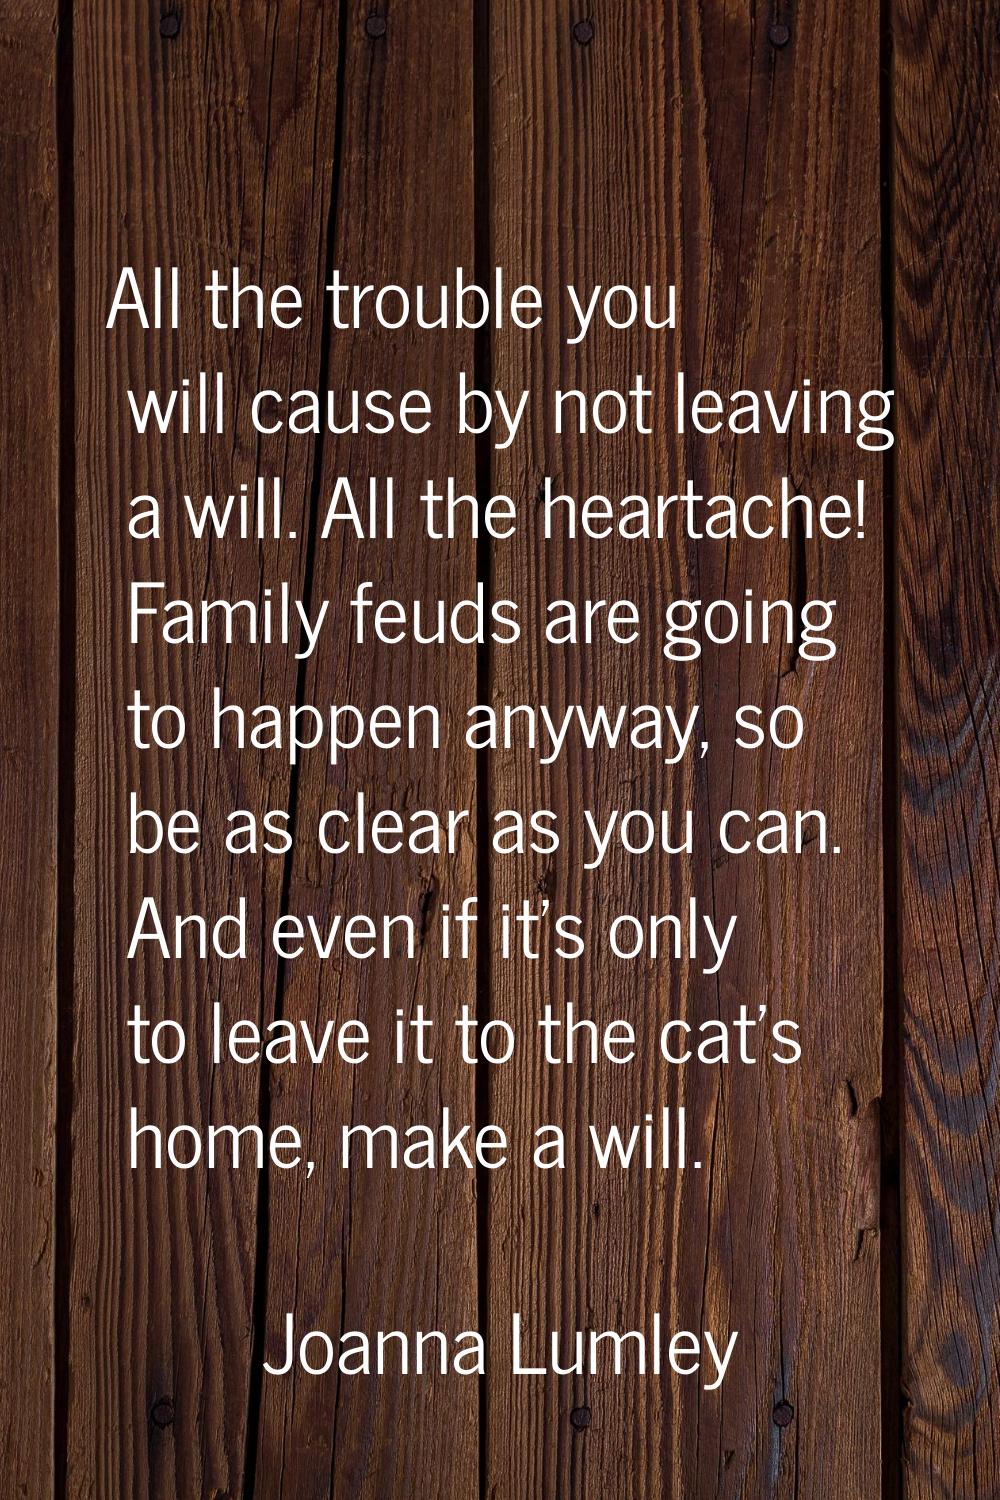 All the trouble you will cause by not leaving a will. All the heartache! Family feuds are going to 